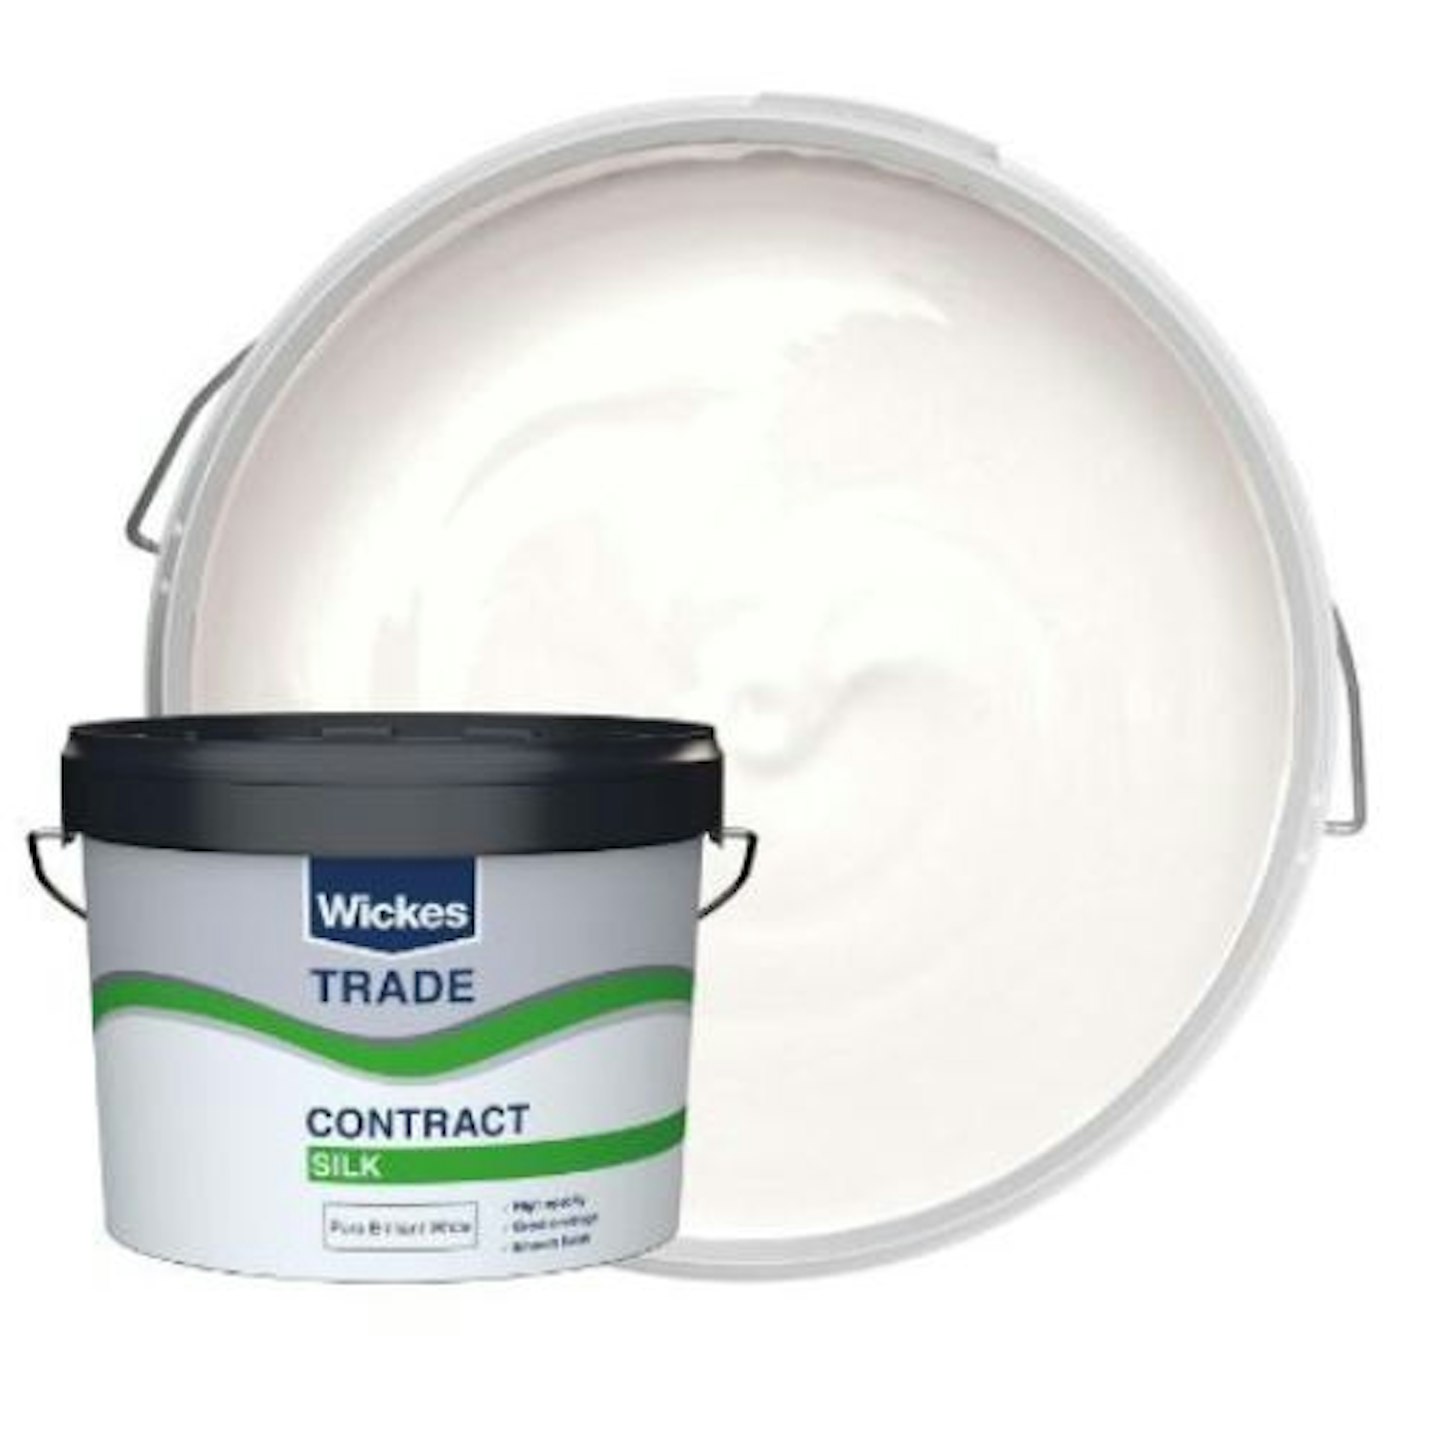  Wickes Trade Contract Silk Emulsion Paint